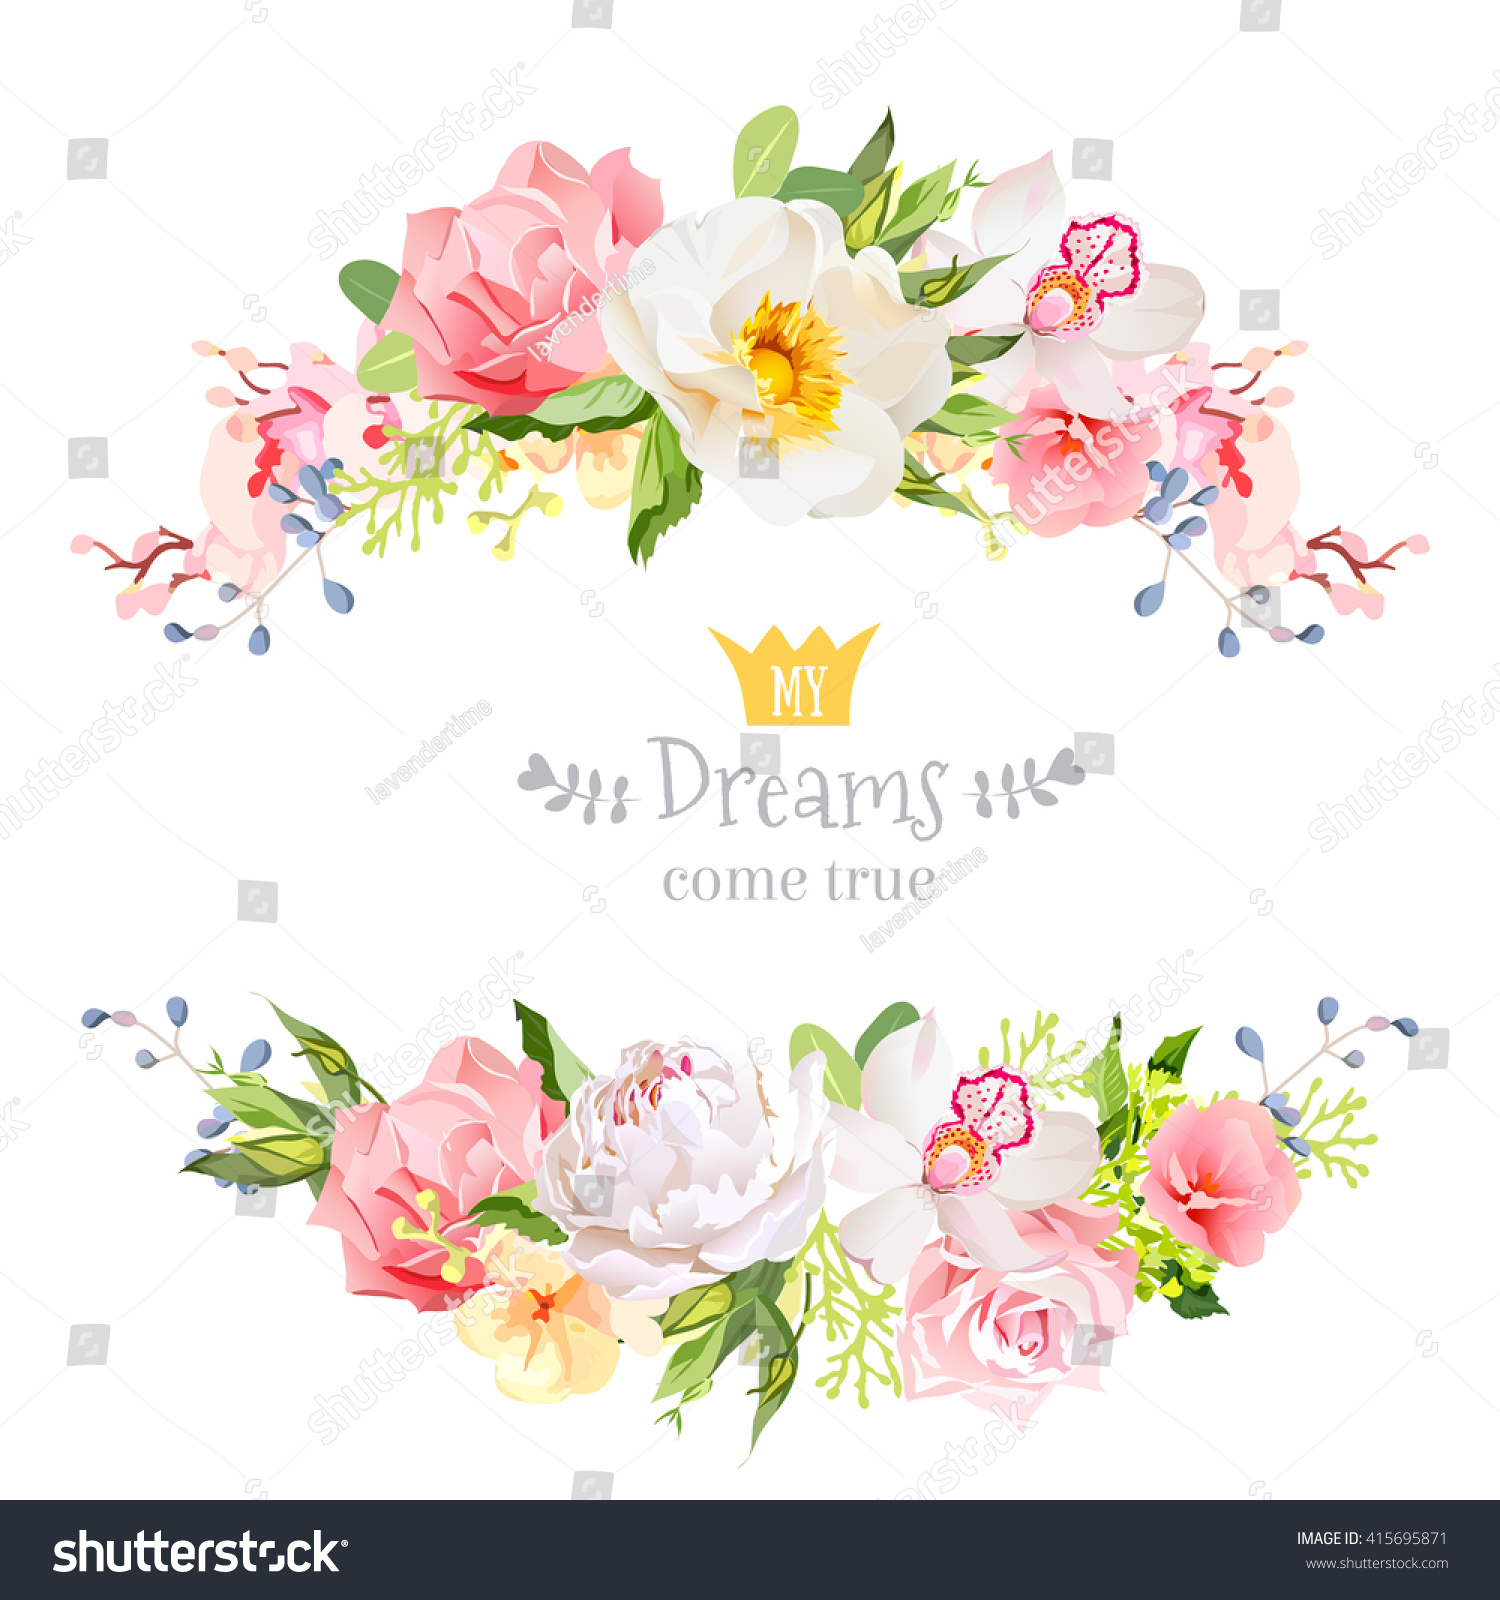 Lovely Wishes Floral Vector Design Frame Stock Vector 415695871